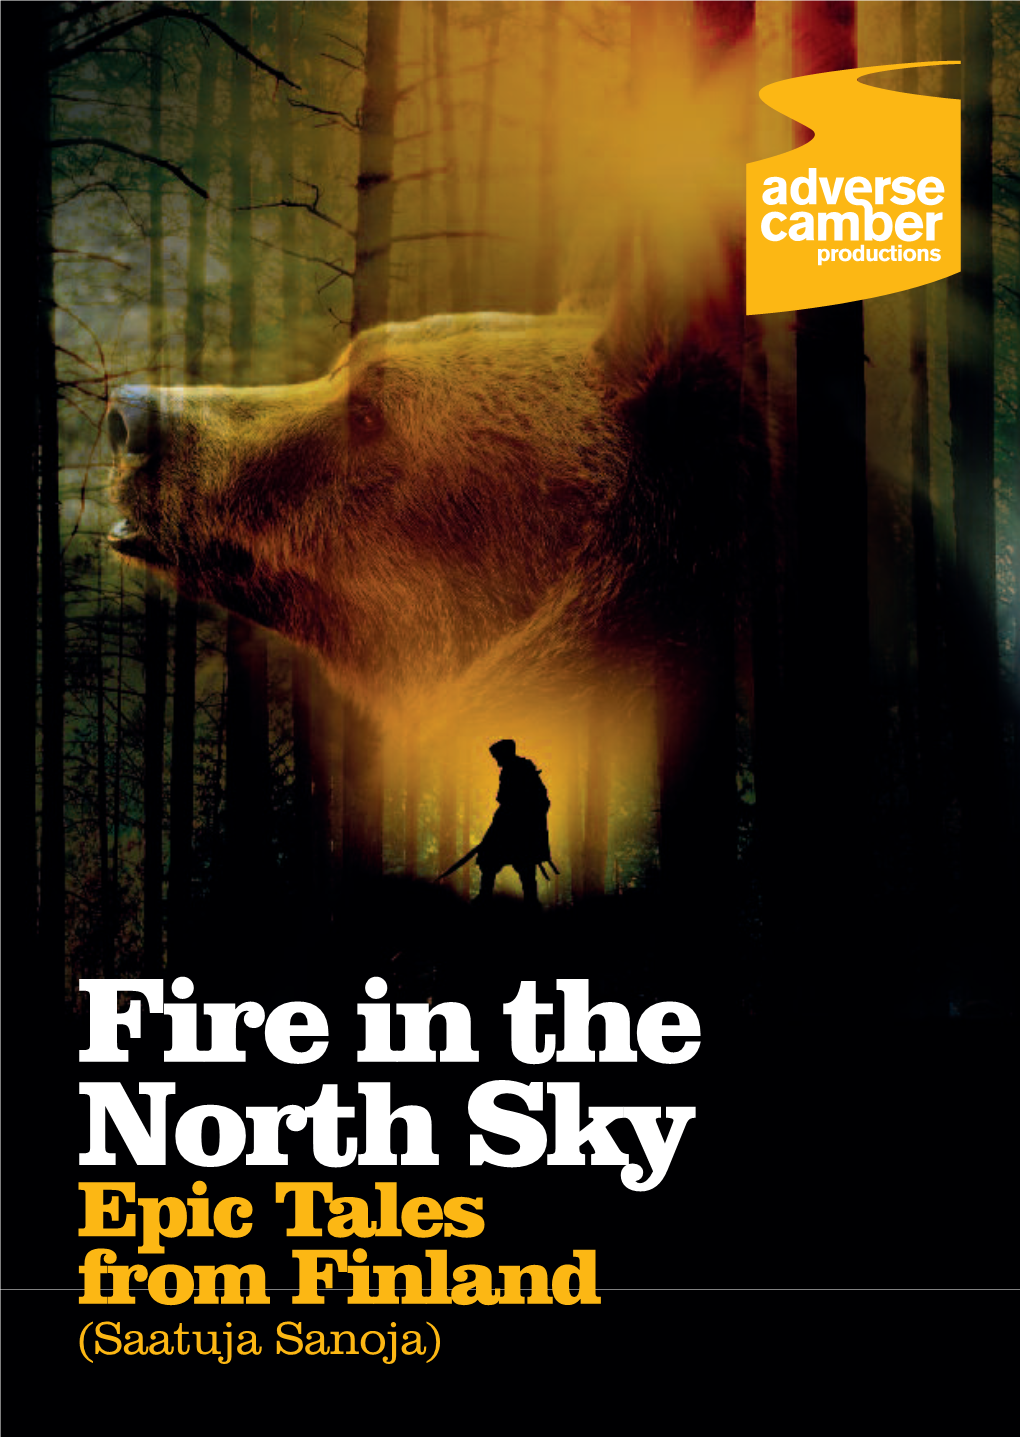 Fire in the North Sky A6 Programme